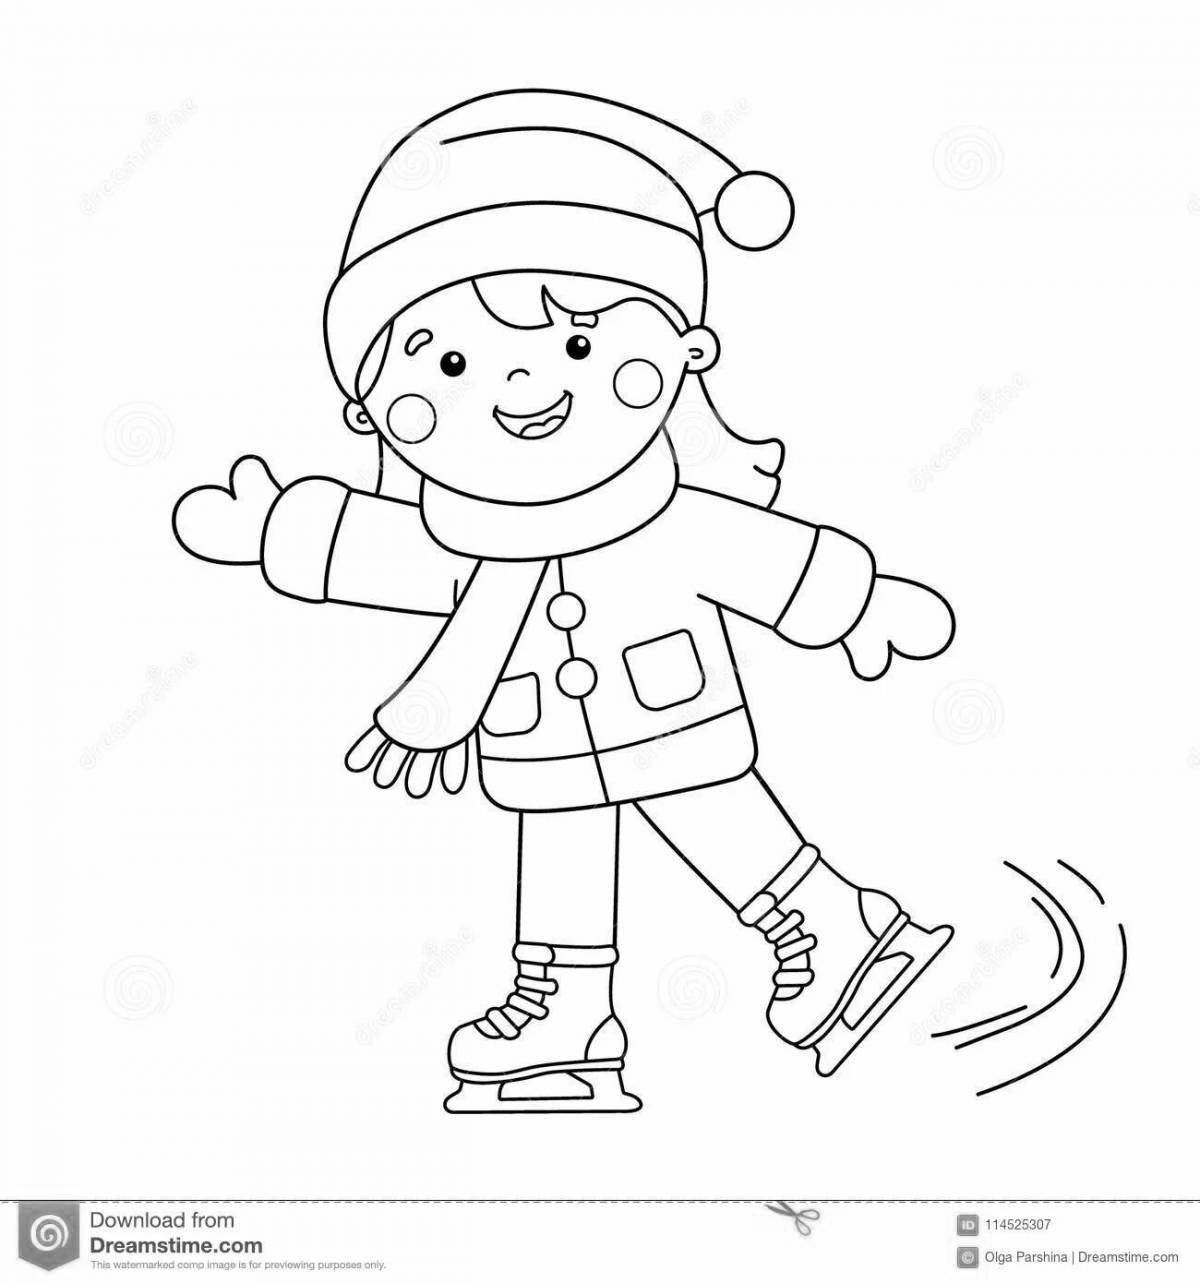 Color explosion skating coloring pages for kids